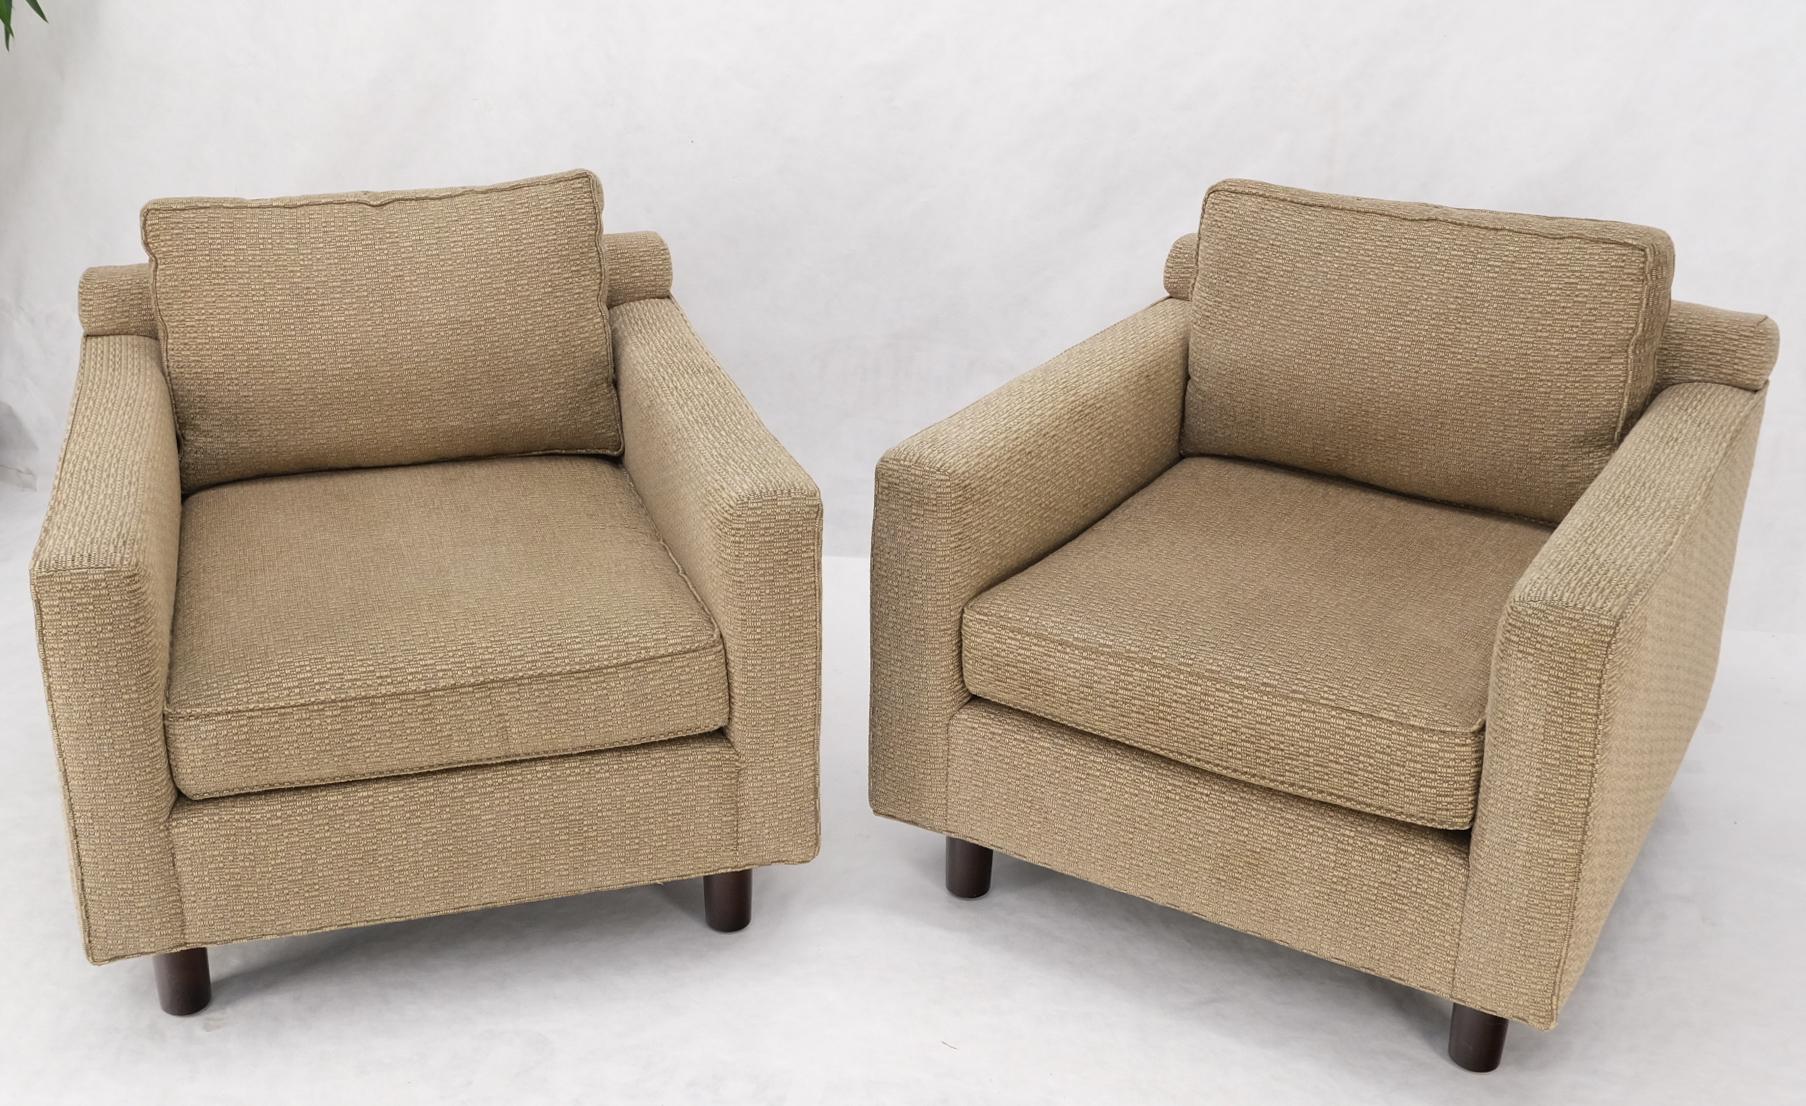 Pair Deep Seat Oatmeal Fabric Upholstery Contemporary Lounge Chair on Dowel Legs In Good Condition For Sale In Rockaway, NJ